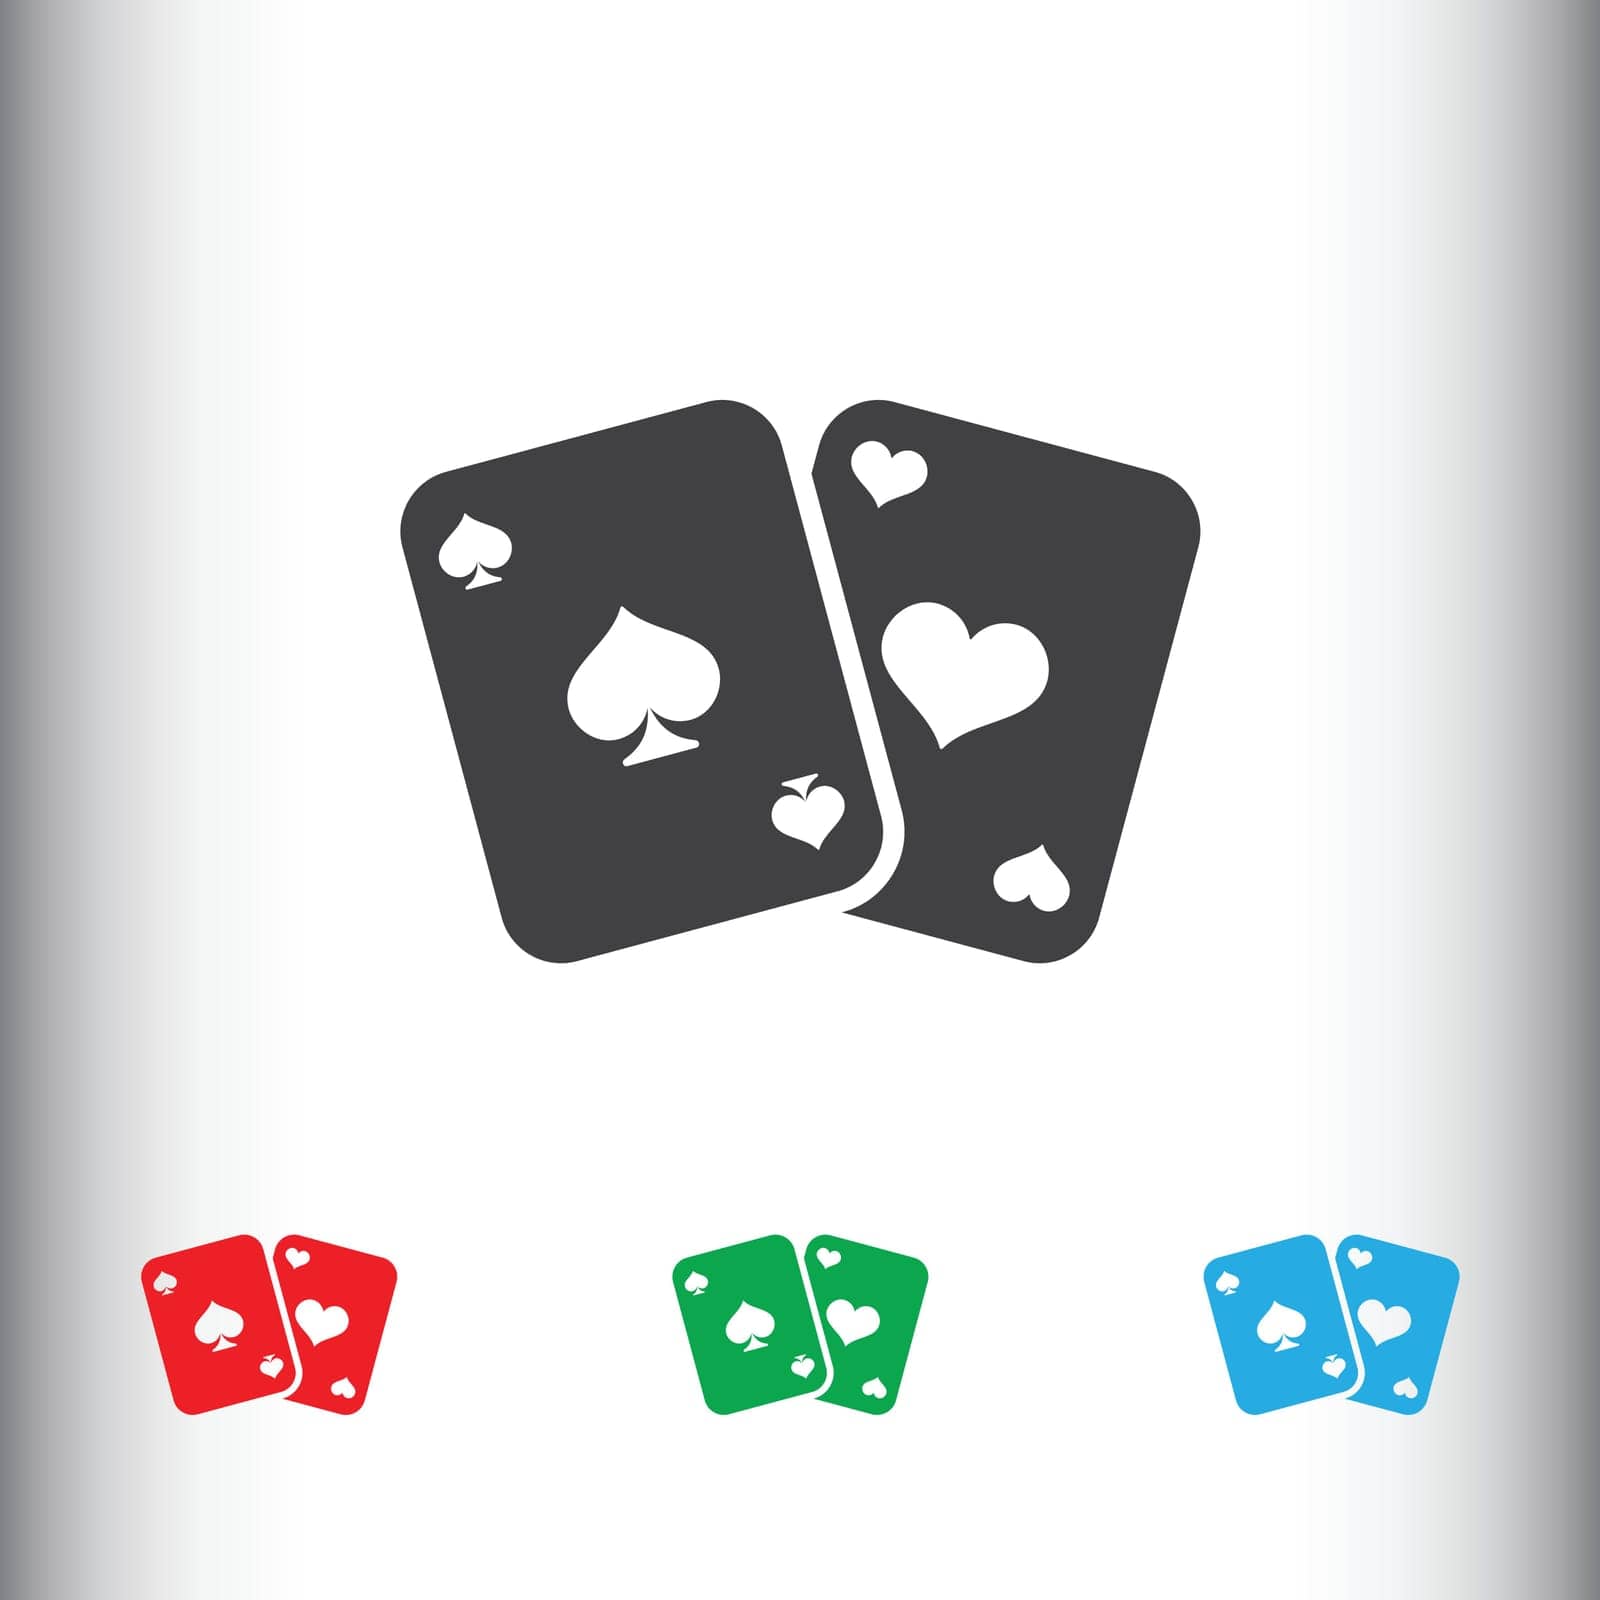 play,symbol,game,ace,cards,color,objects,icon,sign,isolated,gambling,casino,simple,suits,symbols,space,red,white,design,club,vector,win,decoration,leisure,group,element,set,shape,suites,gamble,poker,black,icons,jack,heart,diamond,background,playing,illustration,spades,card